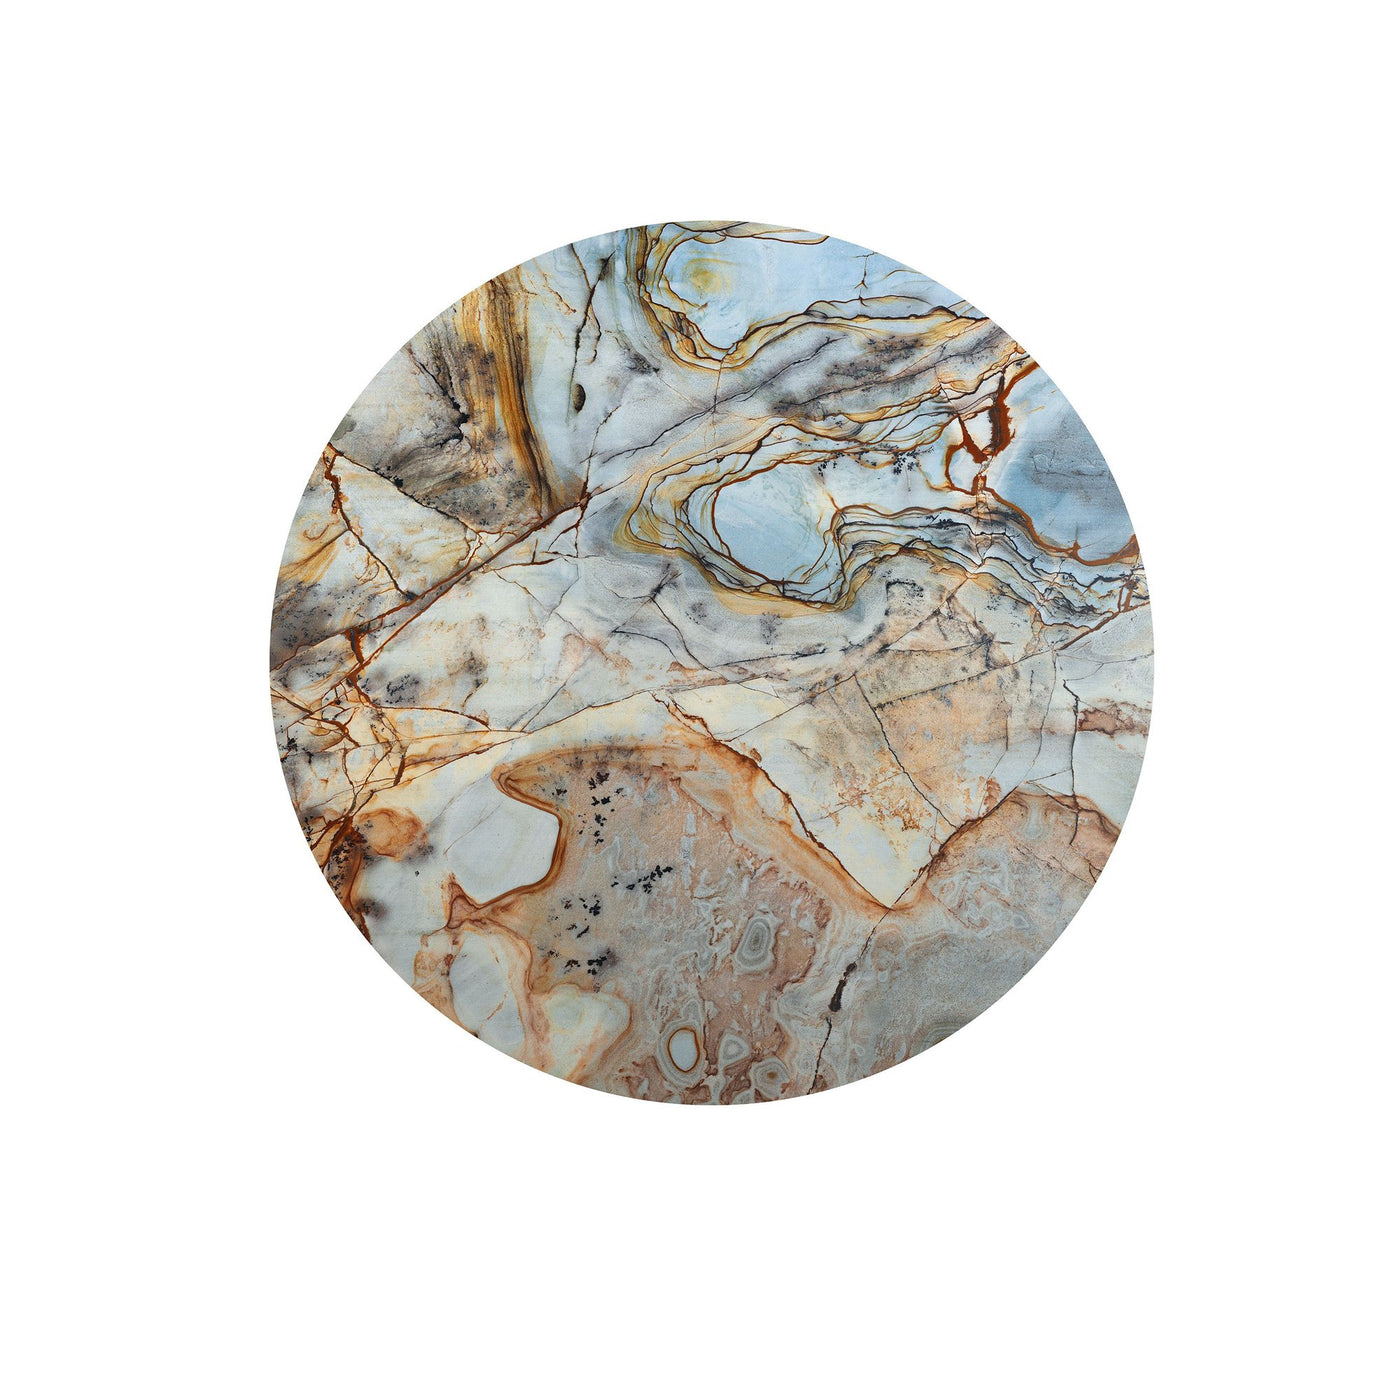 Marble Rock Circle Wall Art (Self-Adhesive)-Wall Decor-ABSTRACT WALLPAPERS, ART WALLPAPER, CIRCLE WALL ART, ECO MURALS, NATURE WALL ART, PATTERN WALLPAPERS, SUSTAINABLE DECOR-Forest Homes-Nature inspired decor-Nature decor